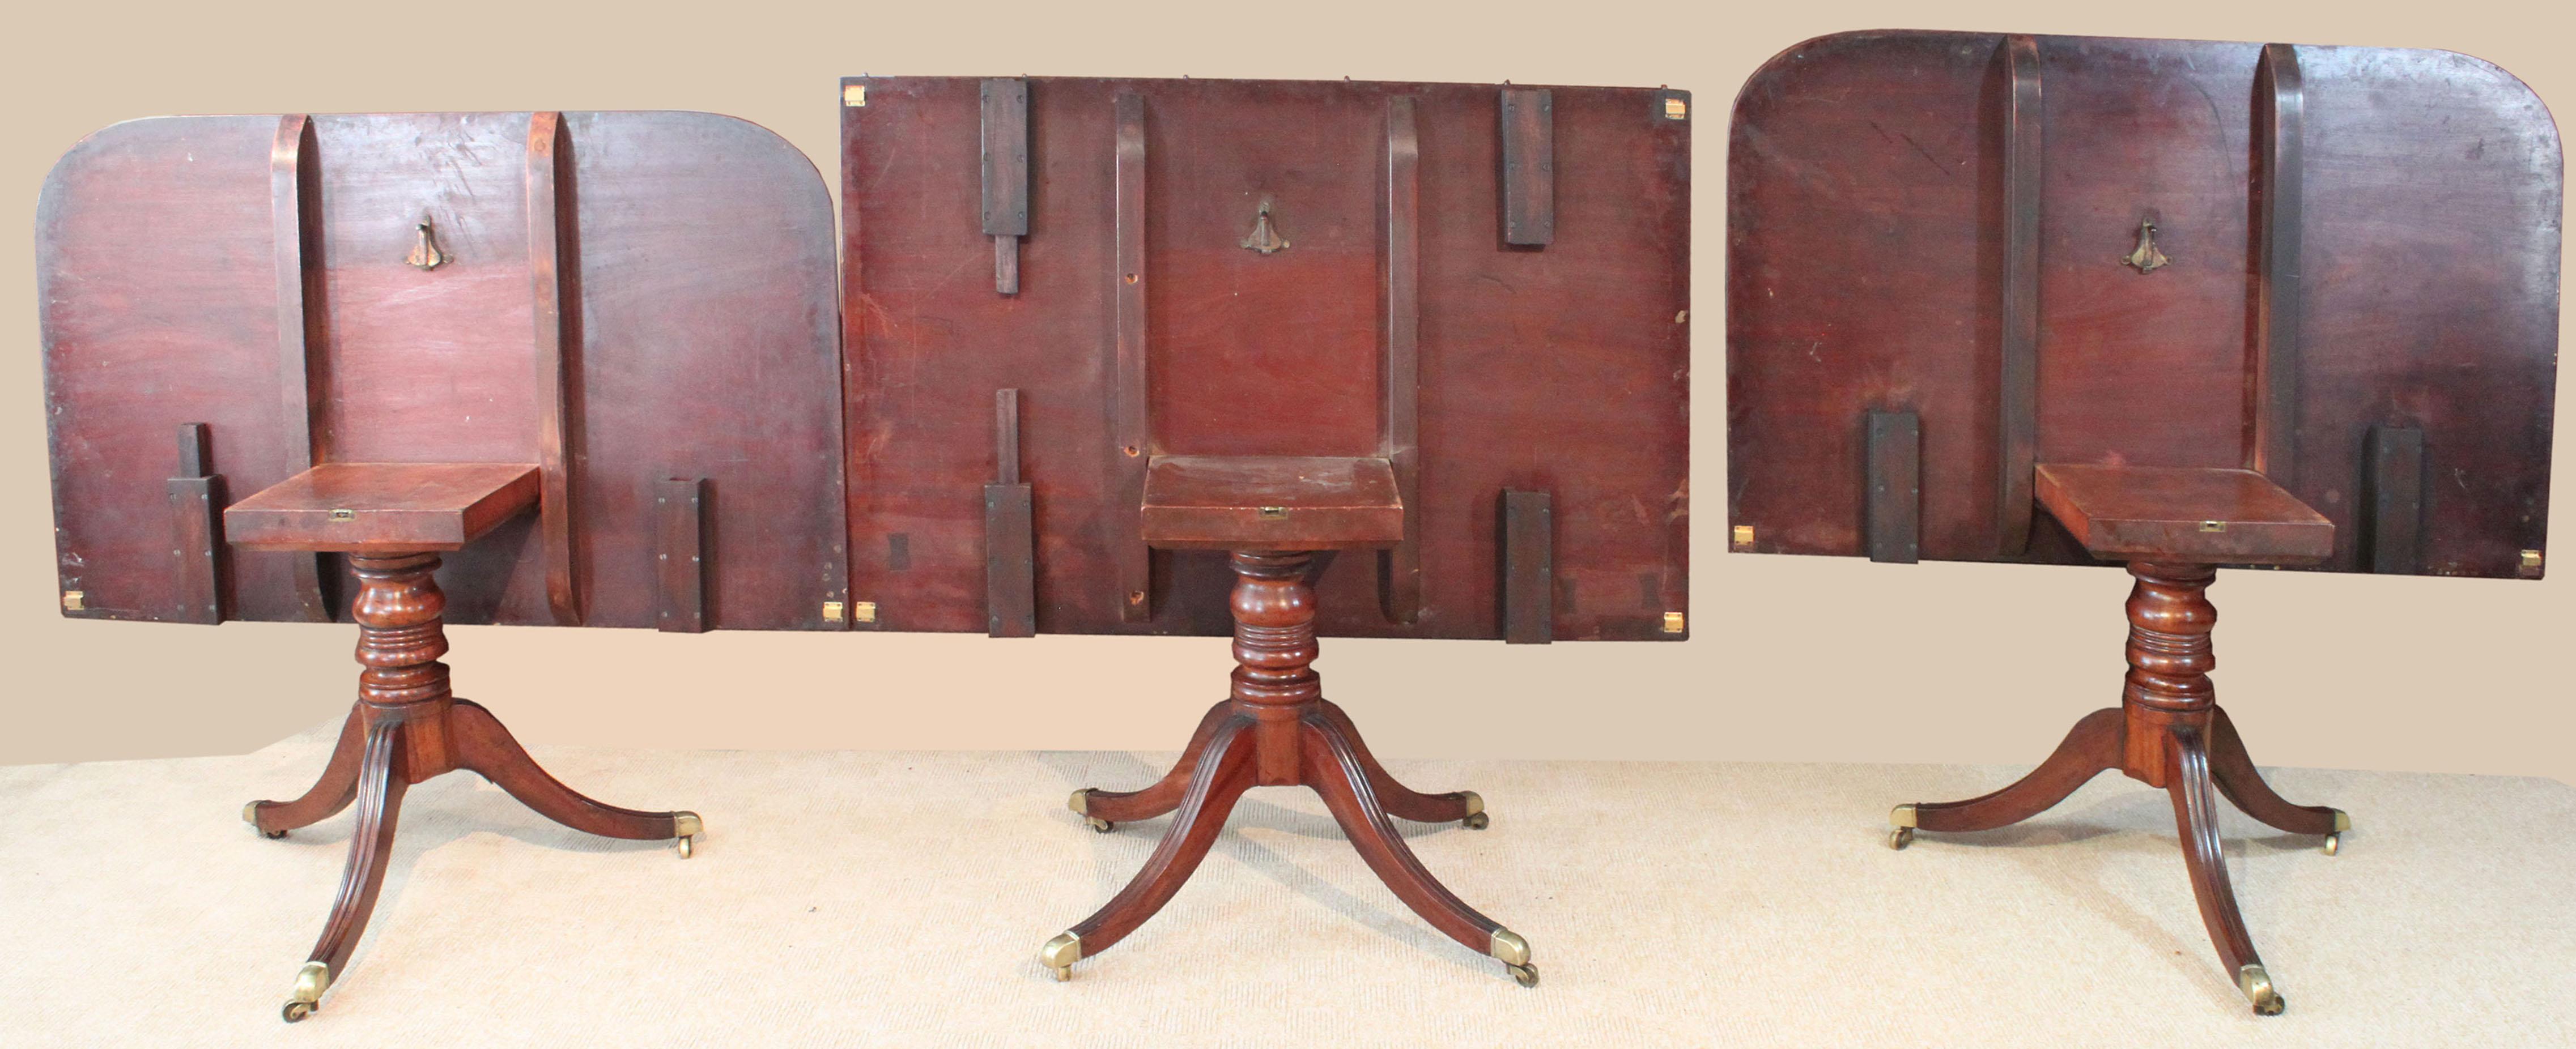 Regency Three Pillar Mahogany Dining Table In Good Condition For Sale In Bradford-on-Avon, Wiltshire